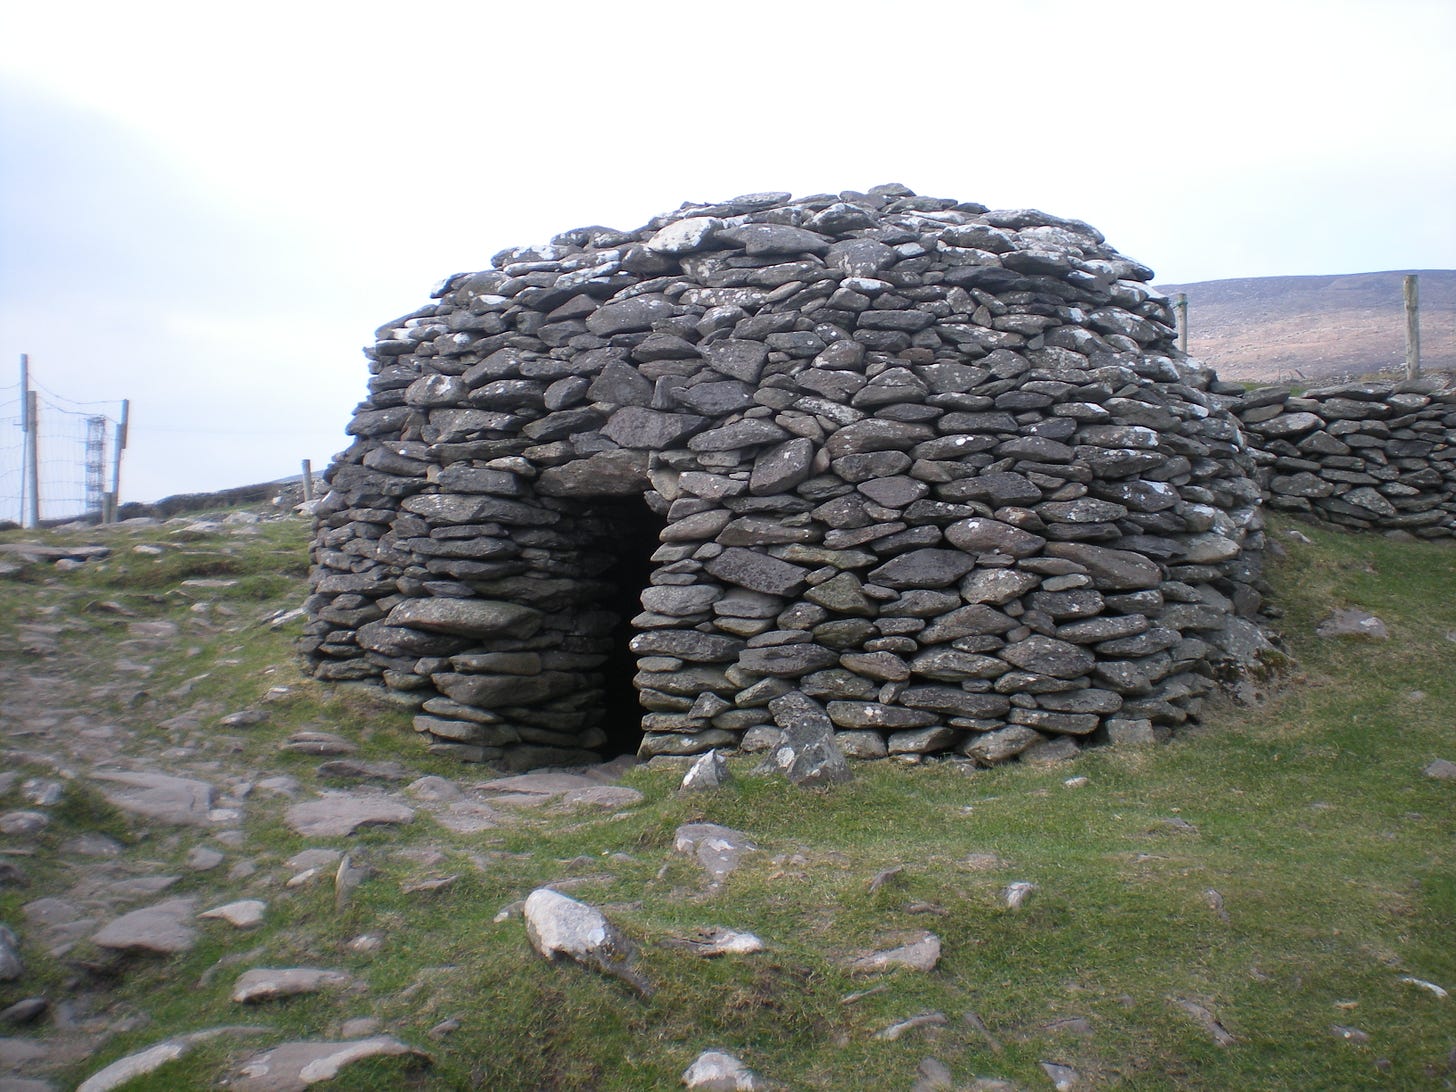 A round, hut with a low open doorway sits on a green hillside with other rocks strewn around.